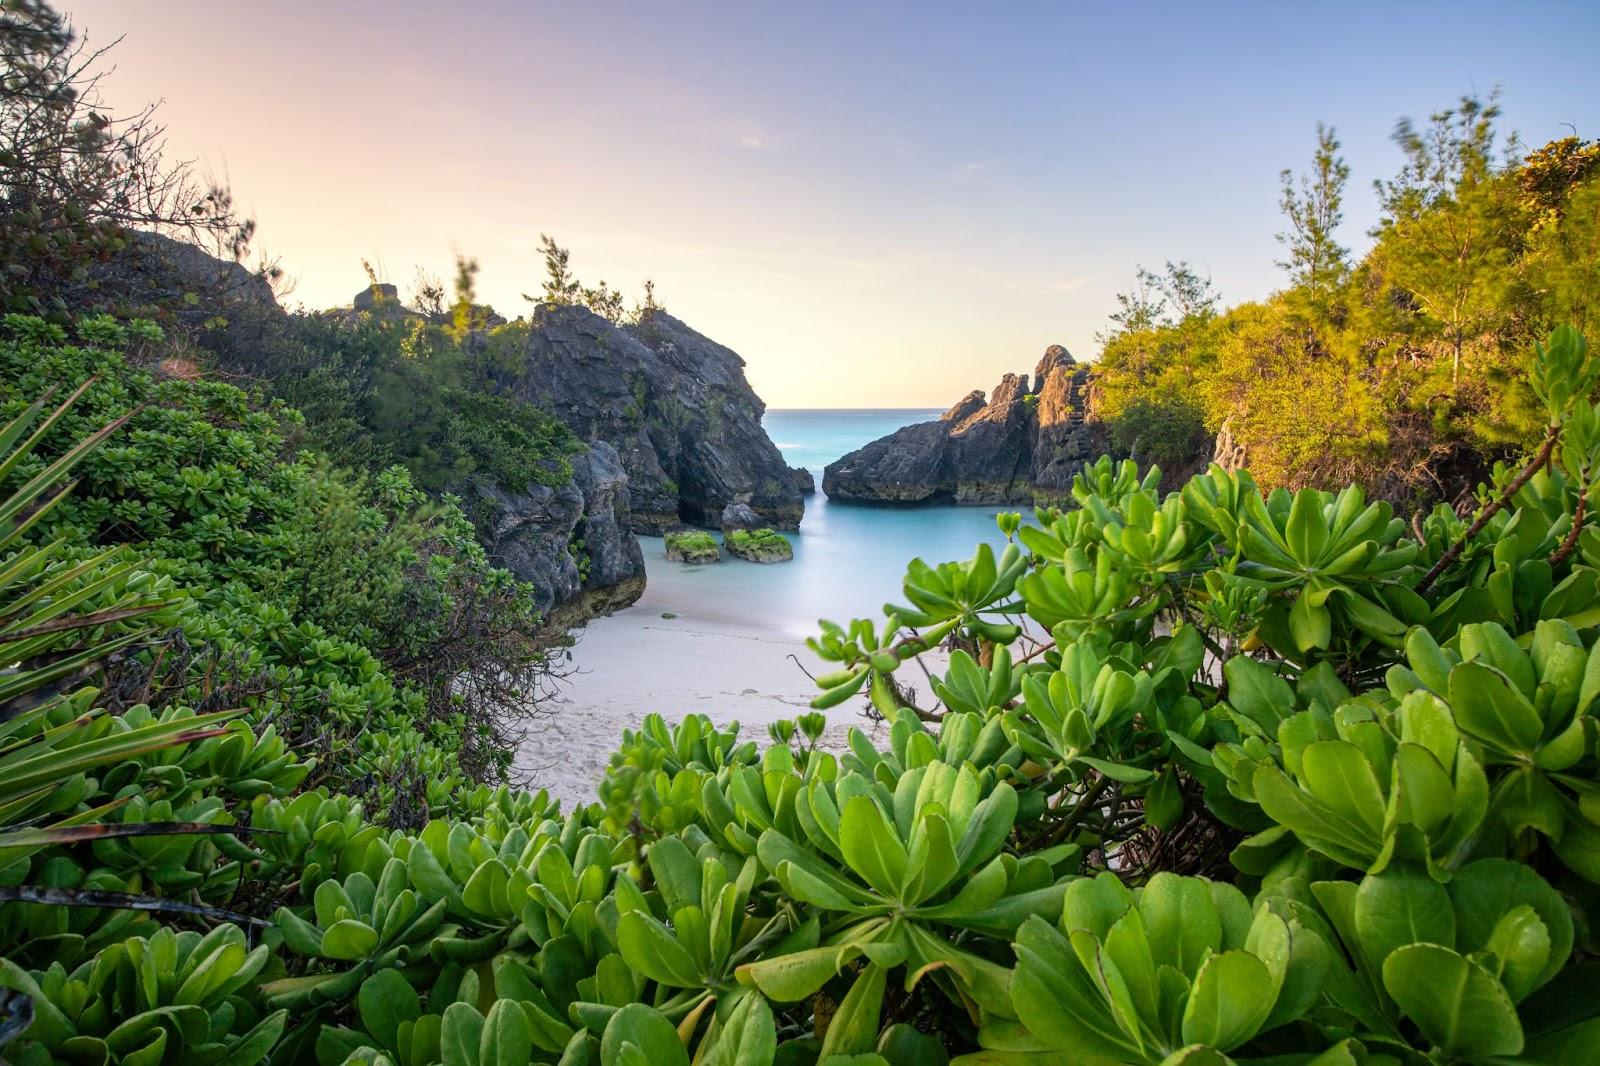 Isolated cove with crystal clear still water, surrounded by vibrant green foliage as early morning light starts to light up the sky. Jobsons Cove, Bermuda